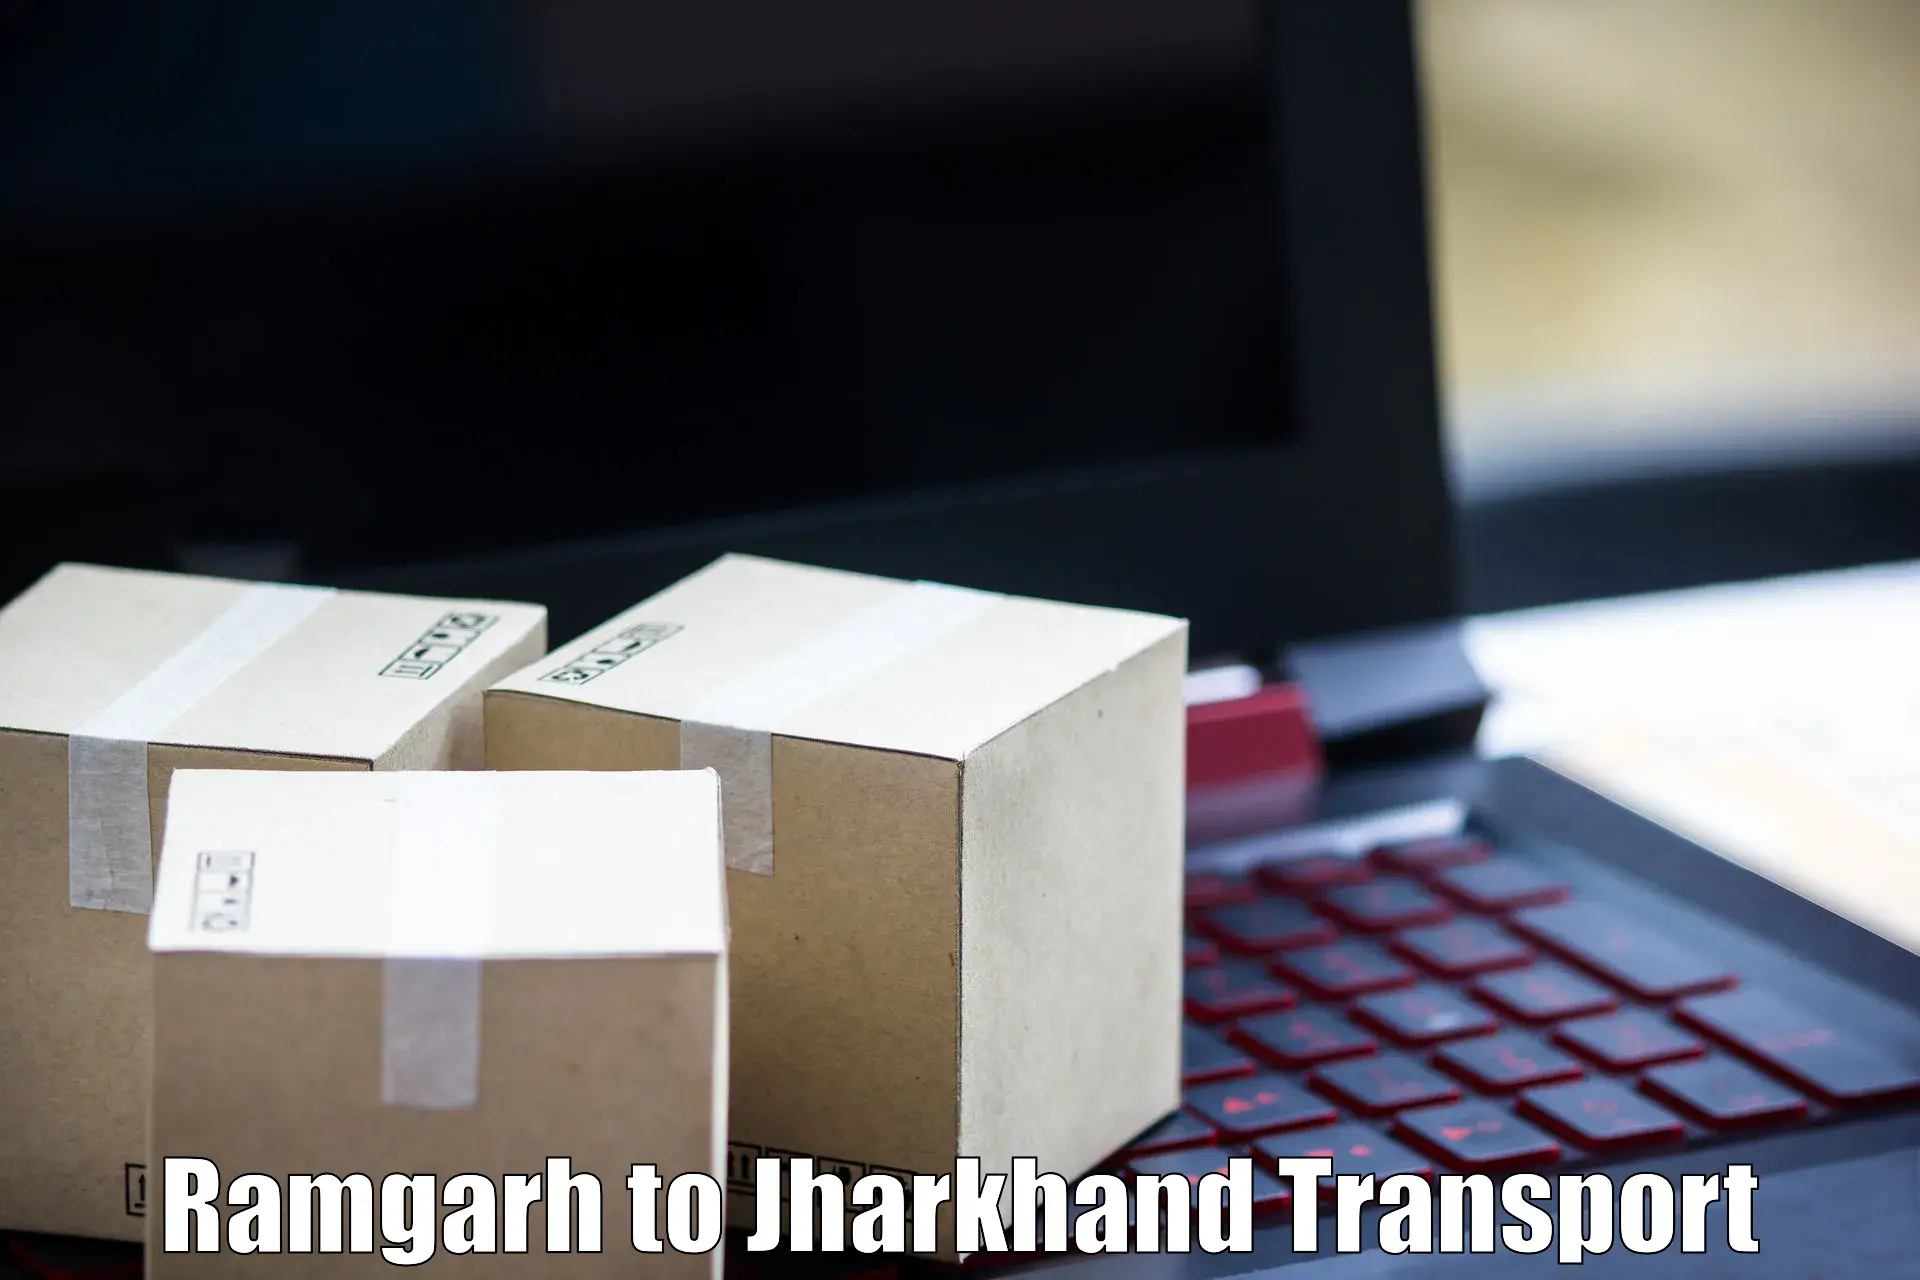 Container transport service Ramgarh to Manoharpur